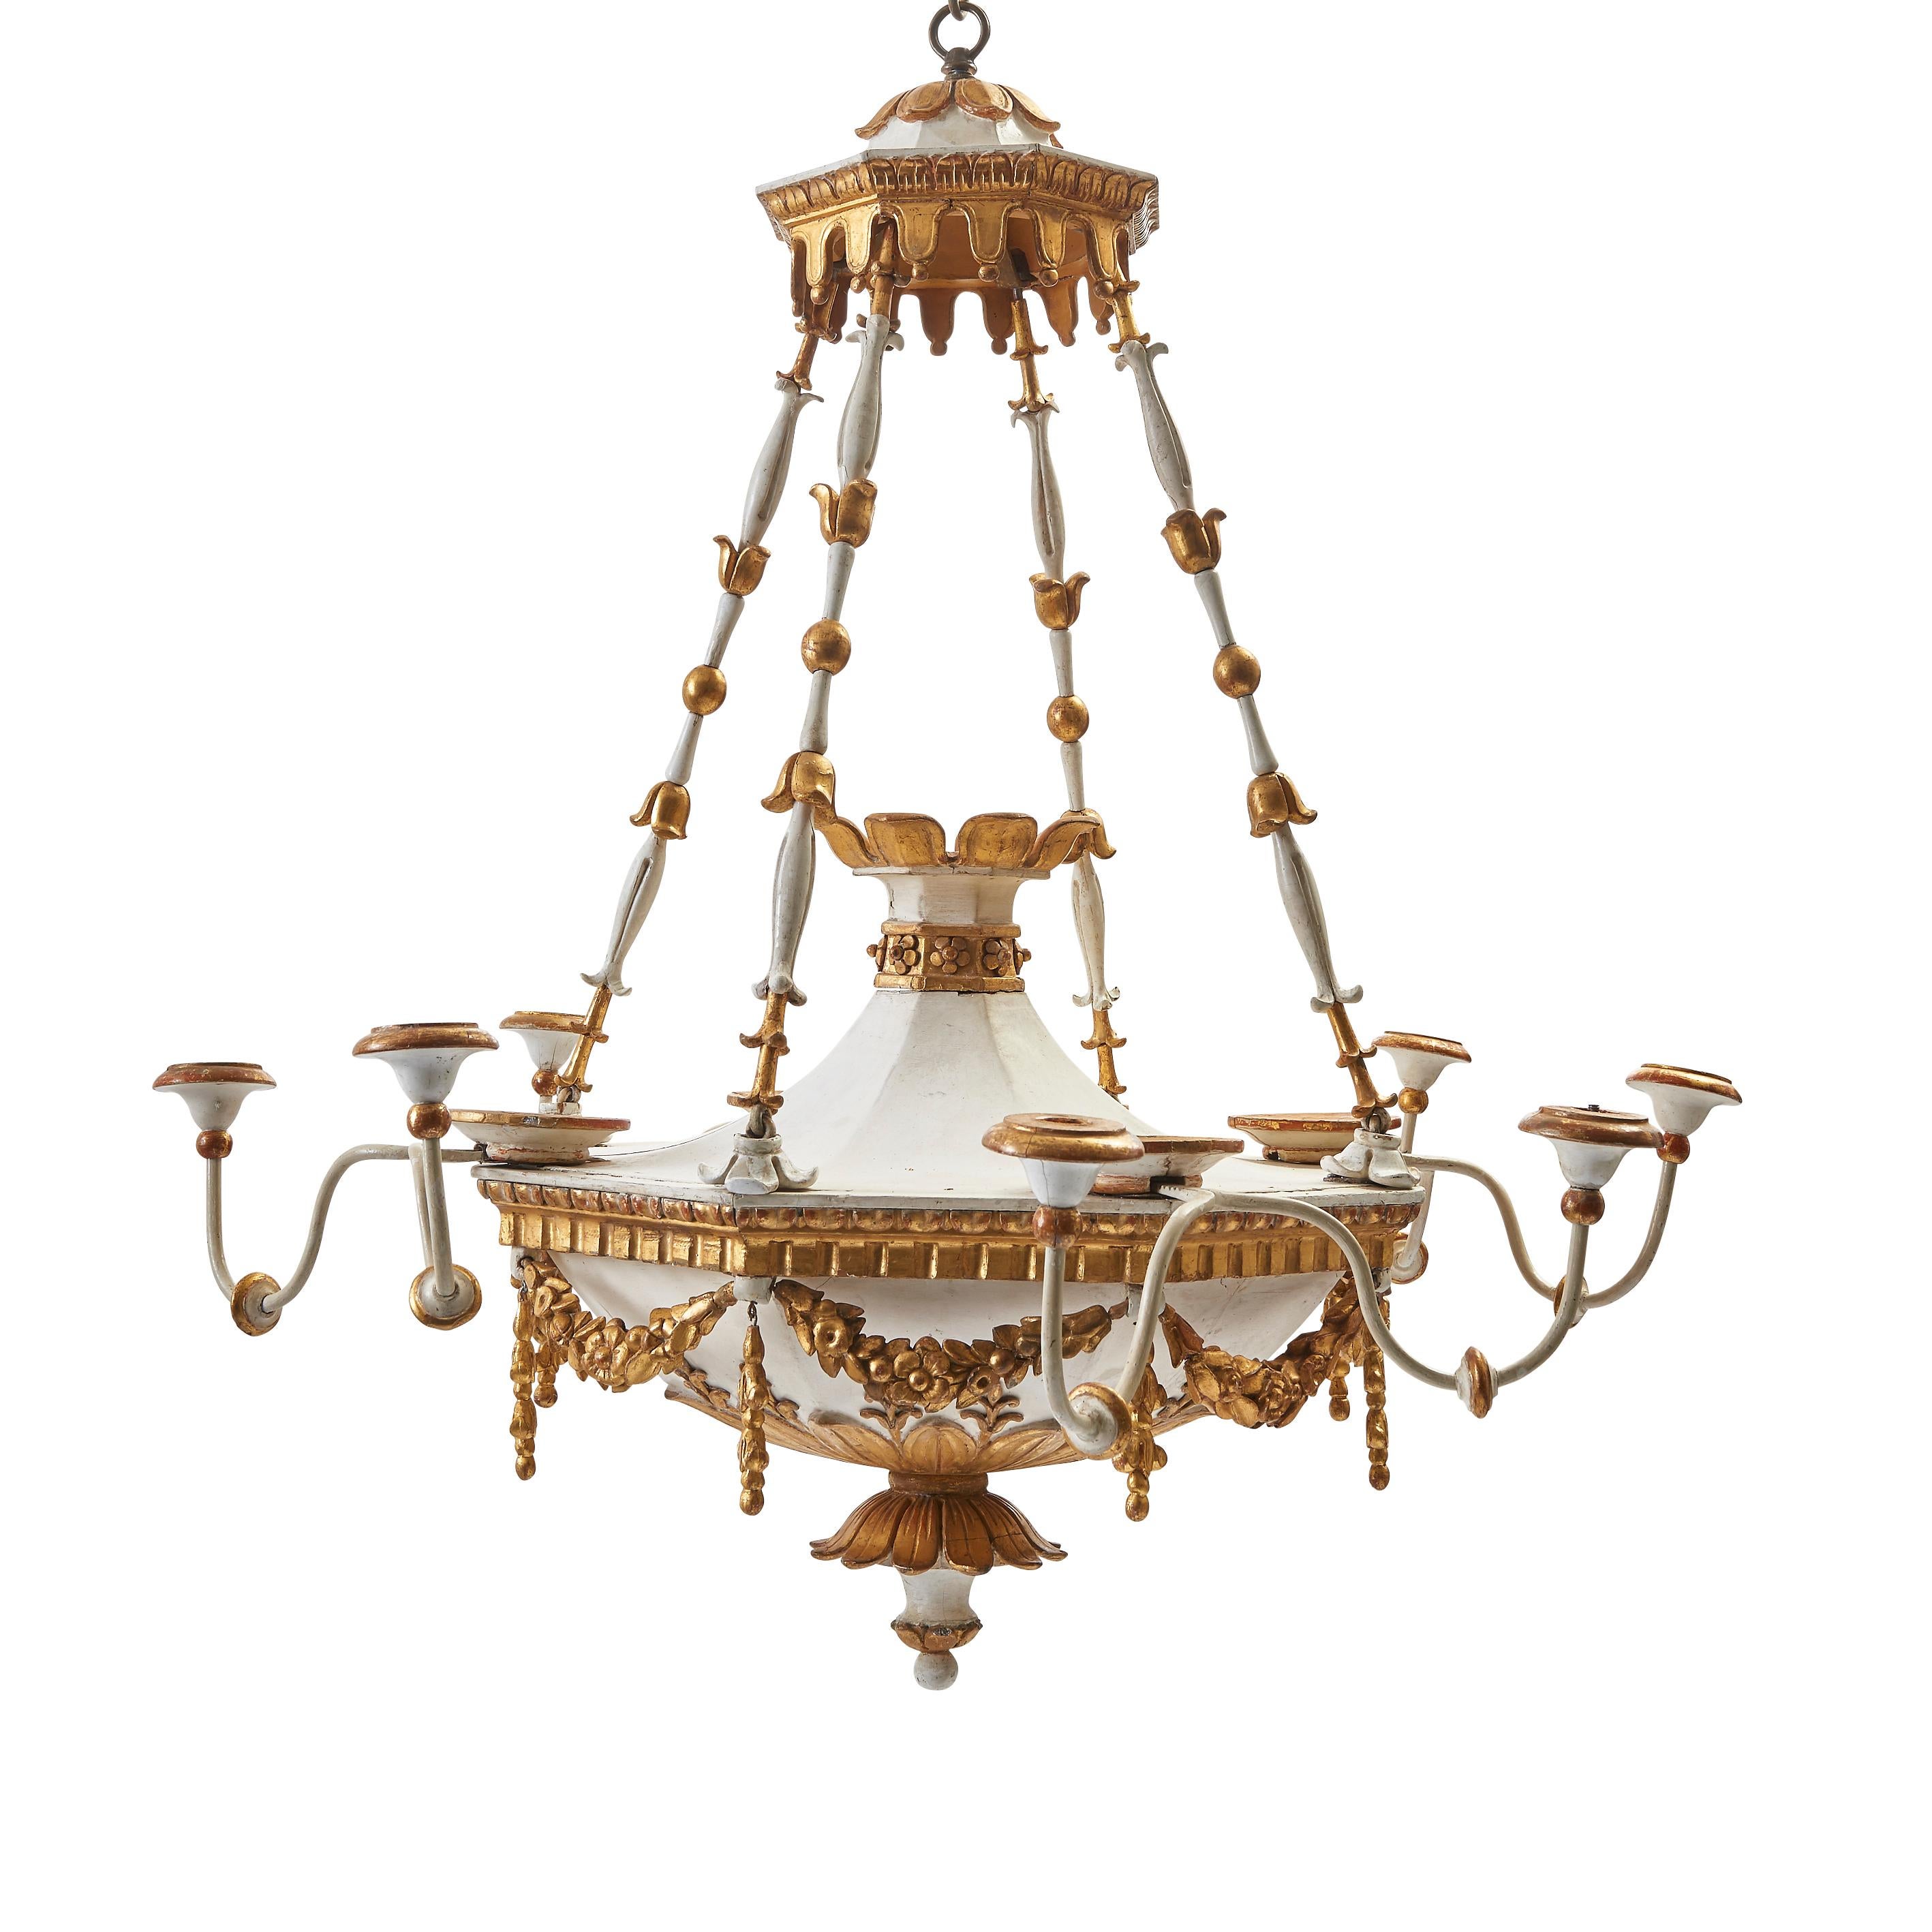 Pair of early 19th century neoclassical parcel-gilt and white painted carved wood chandeliers, Scandinavian, circa 1810. In a typically neoclassical style, with the base of each chandelier decorated with foliate swags and a central finial focal